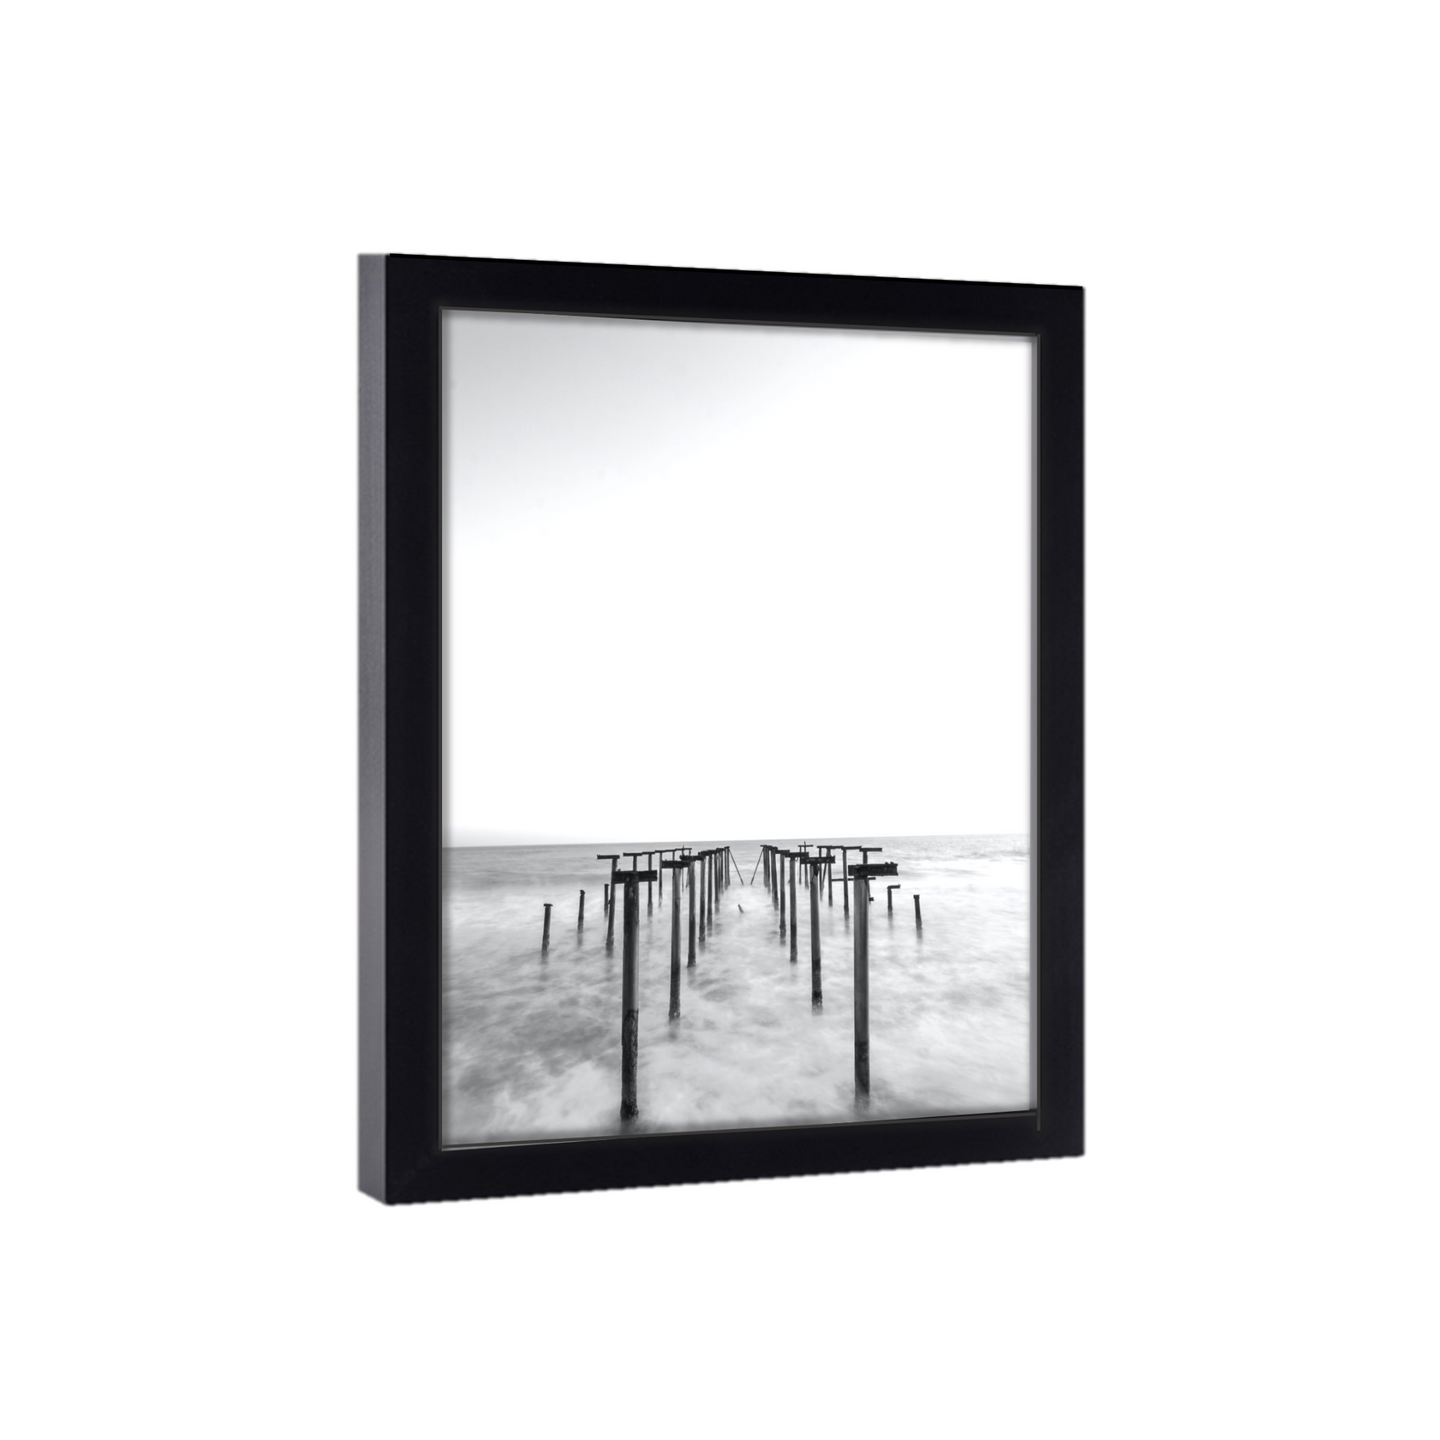 Gallery Wall 34x17 Picture Frame Black Wood 34x17  Poster Size